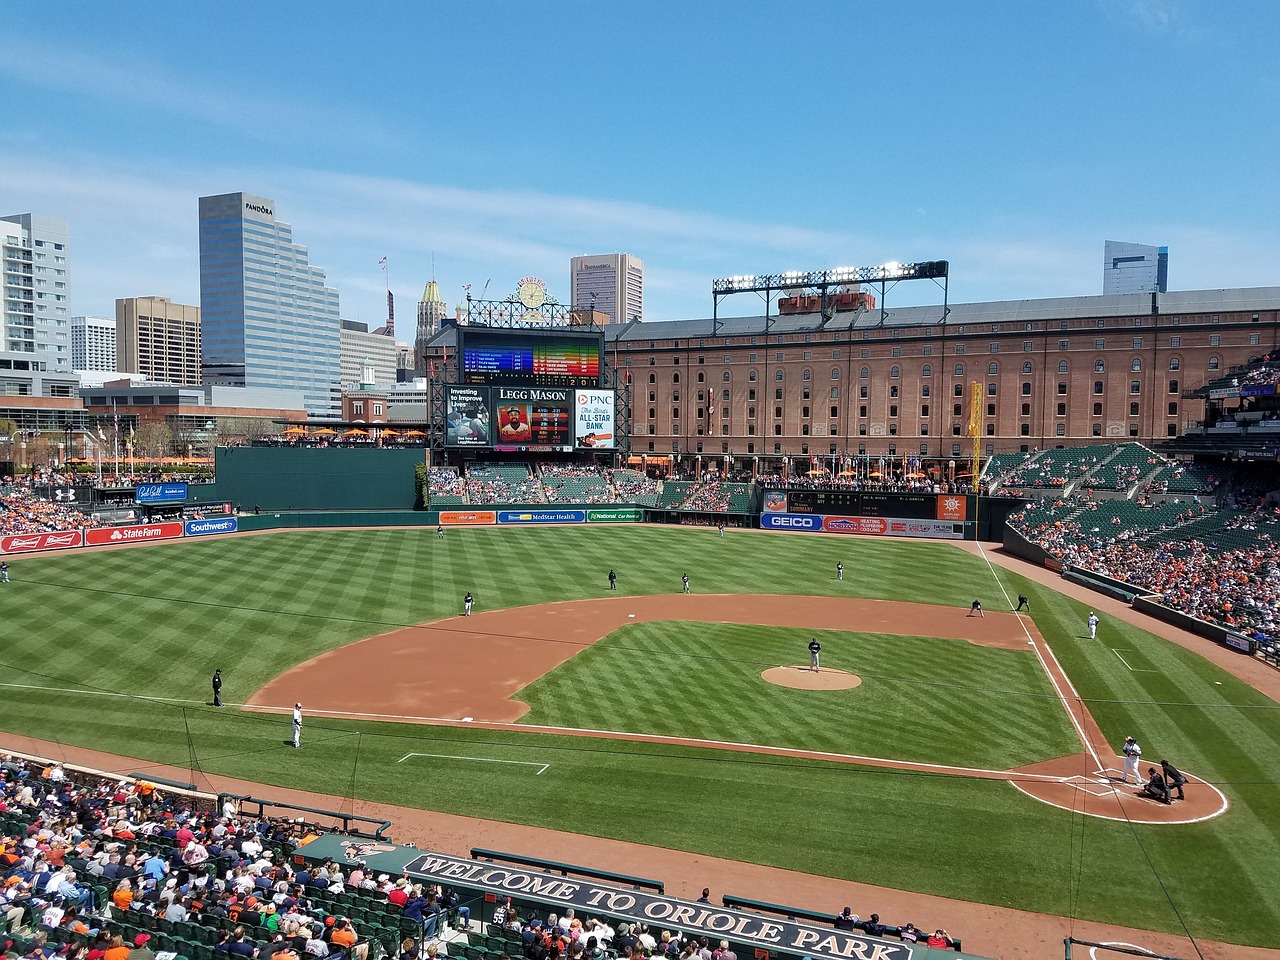 Photo of the baseball field at Oriole Park facing the warehouse.